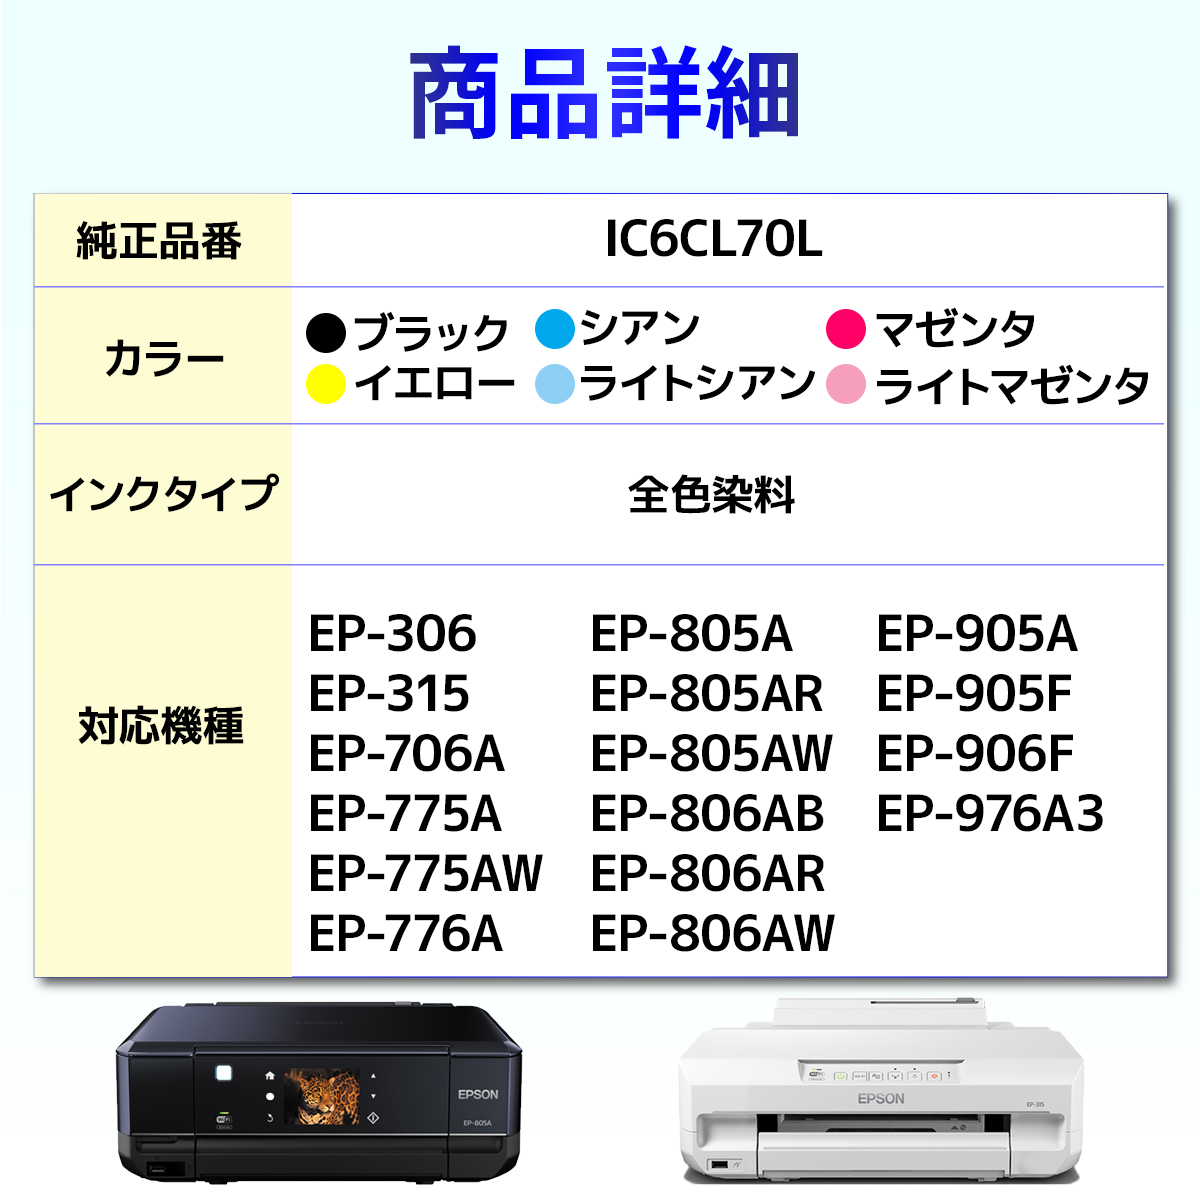 IC6CL70L IC6CL70 IC70 さくらんぼ 互換インク ８個 EP-306 EP-315 EP-706A EP-775A/AW EP-776A EP-805A/AR/AW EP-806AB/AR/AW EP-905A/F EP-906F EP-976A3｜baustore｜03